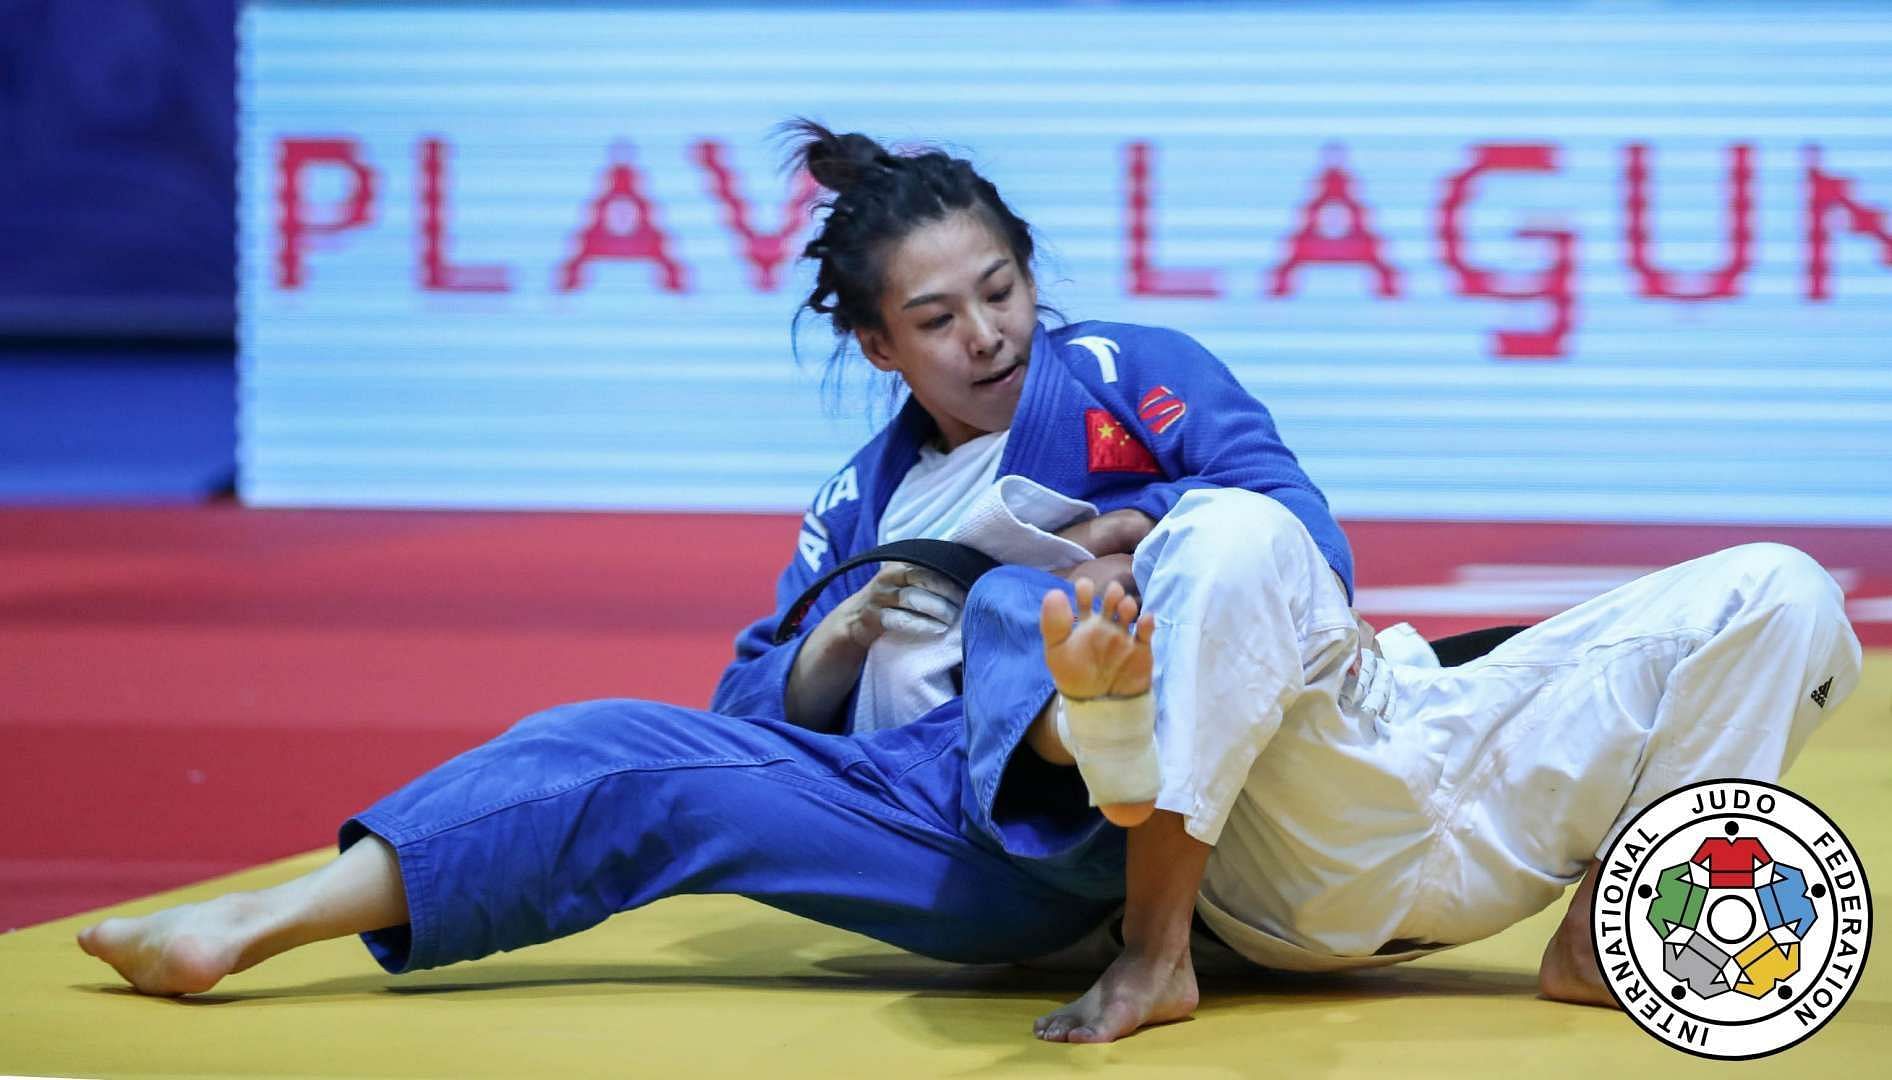 Next month’s Judo National Championships to act as a qualifier for